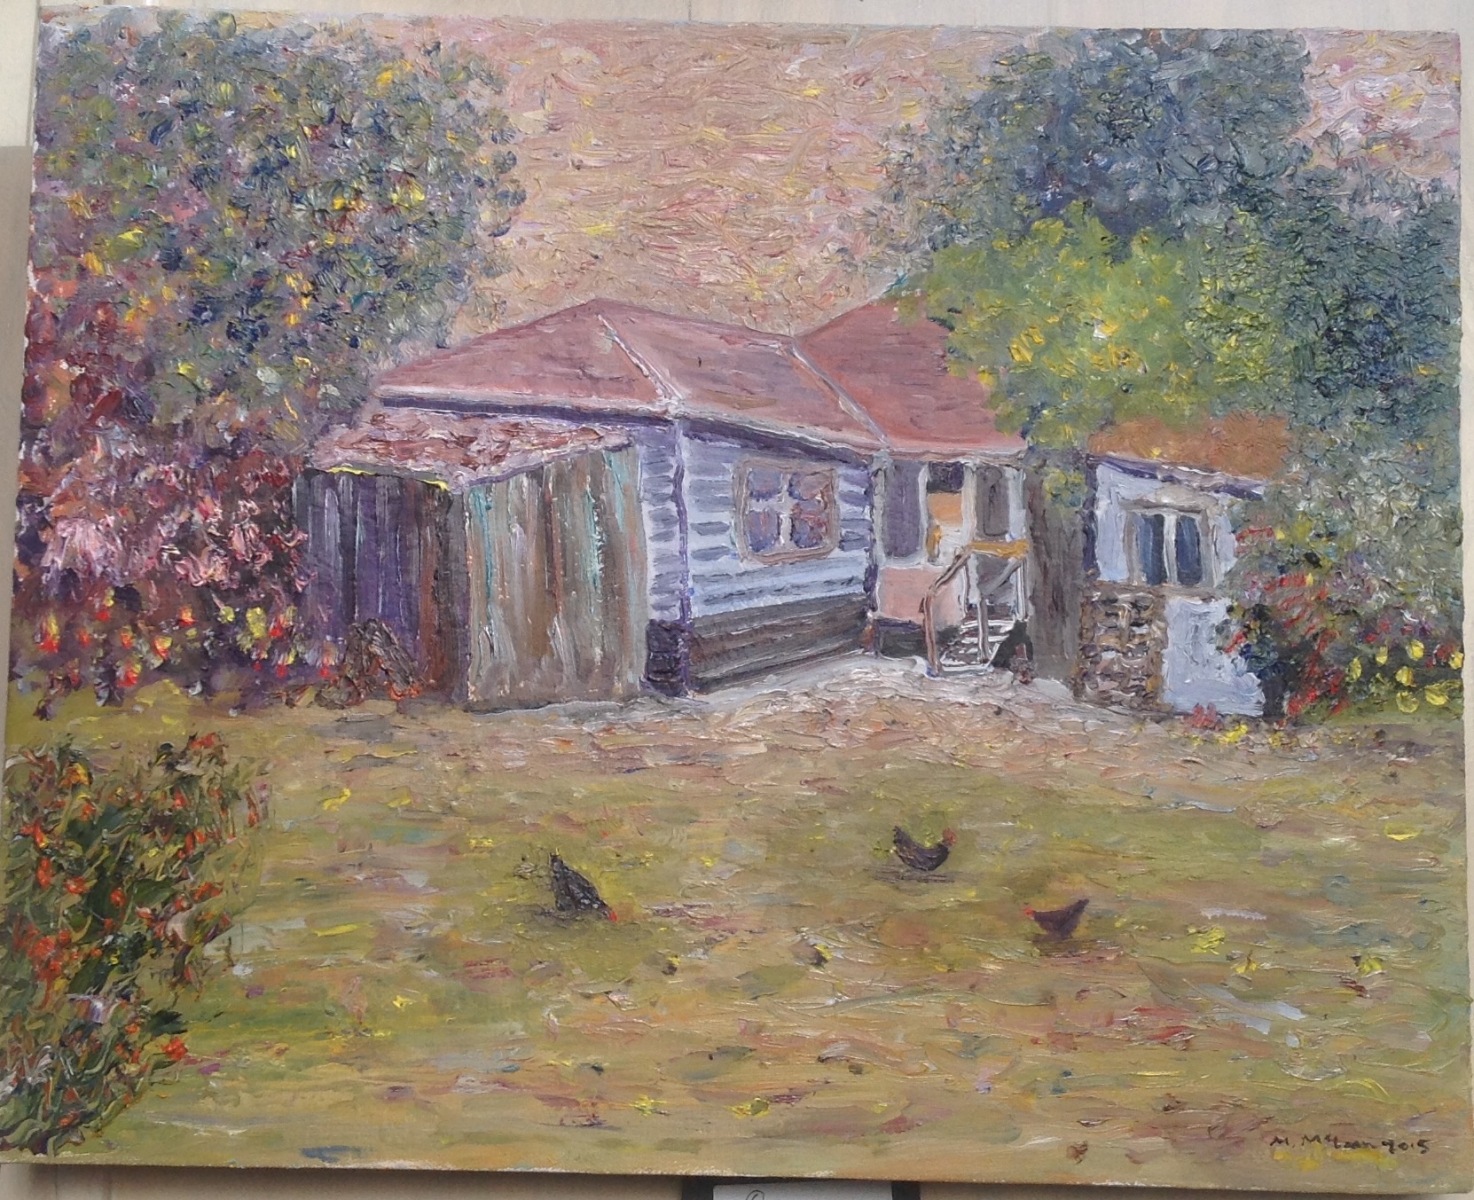 The Old Shack - Mathew McLean